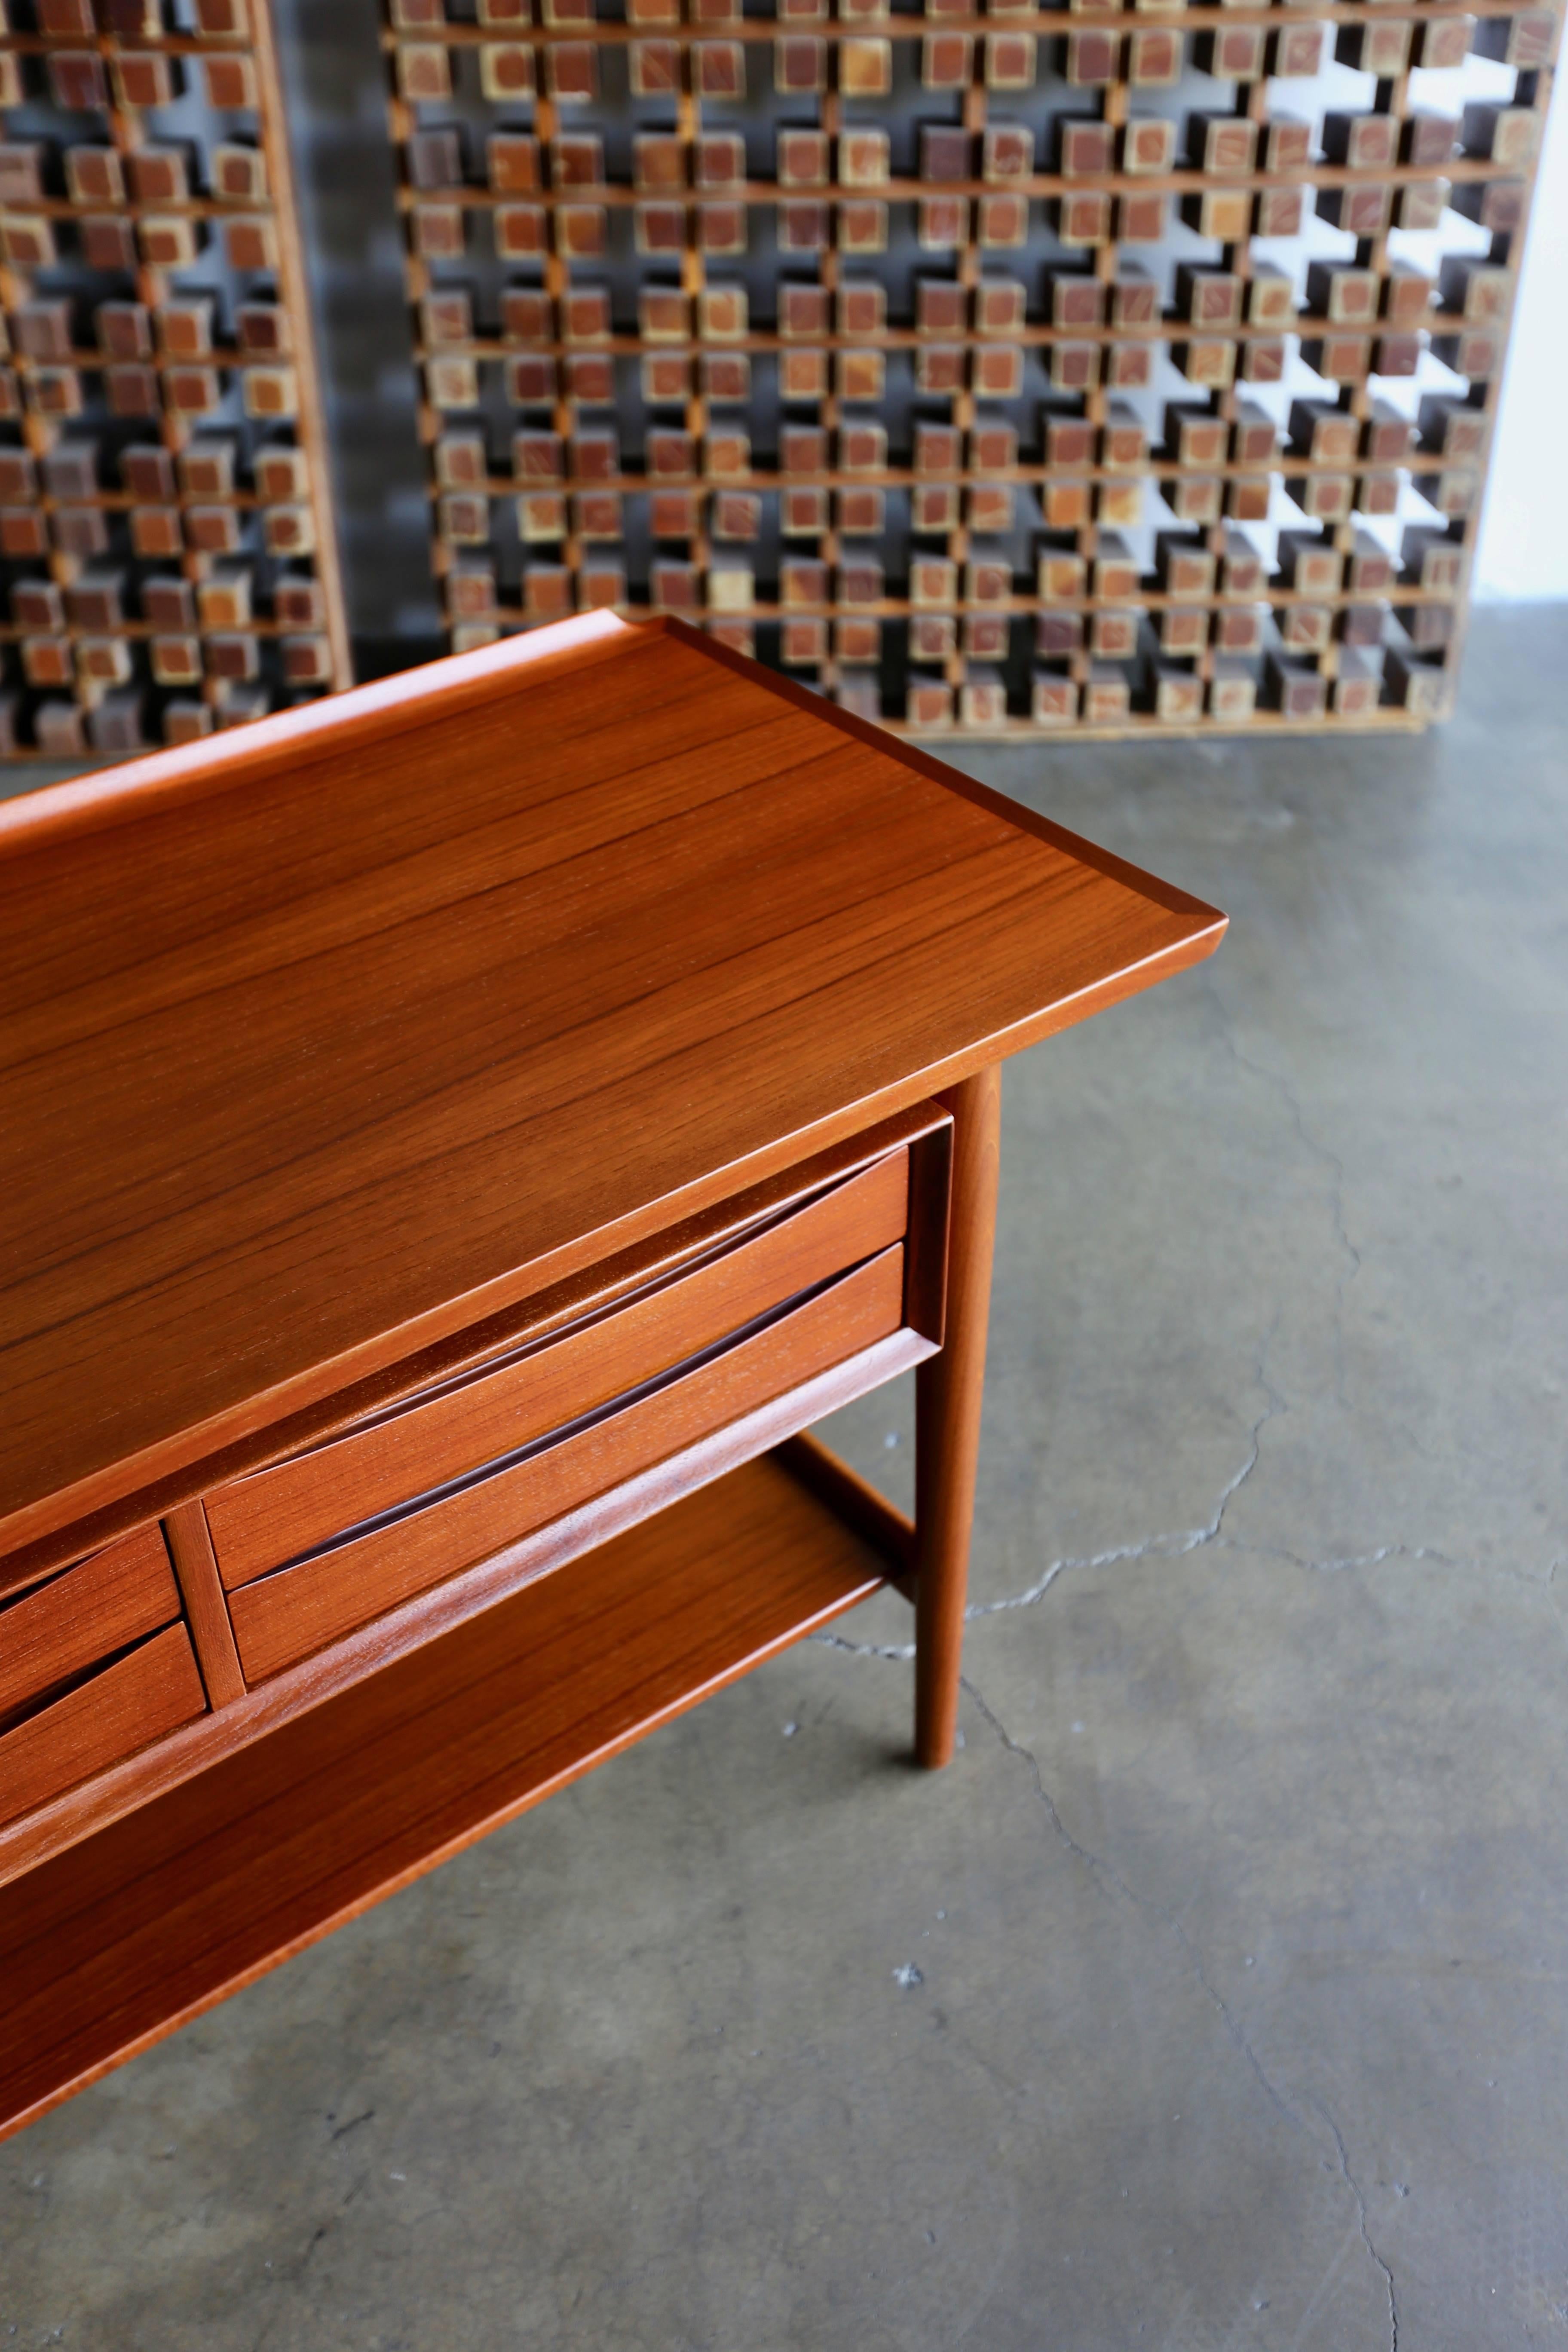 Console table by Arne Vodder for Sibast Mobler. This piece has been professionally restored. Four bow tie drawers with a finished back. This piece retains the original Sibast Mobler label.